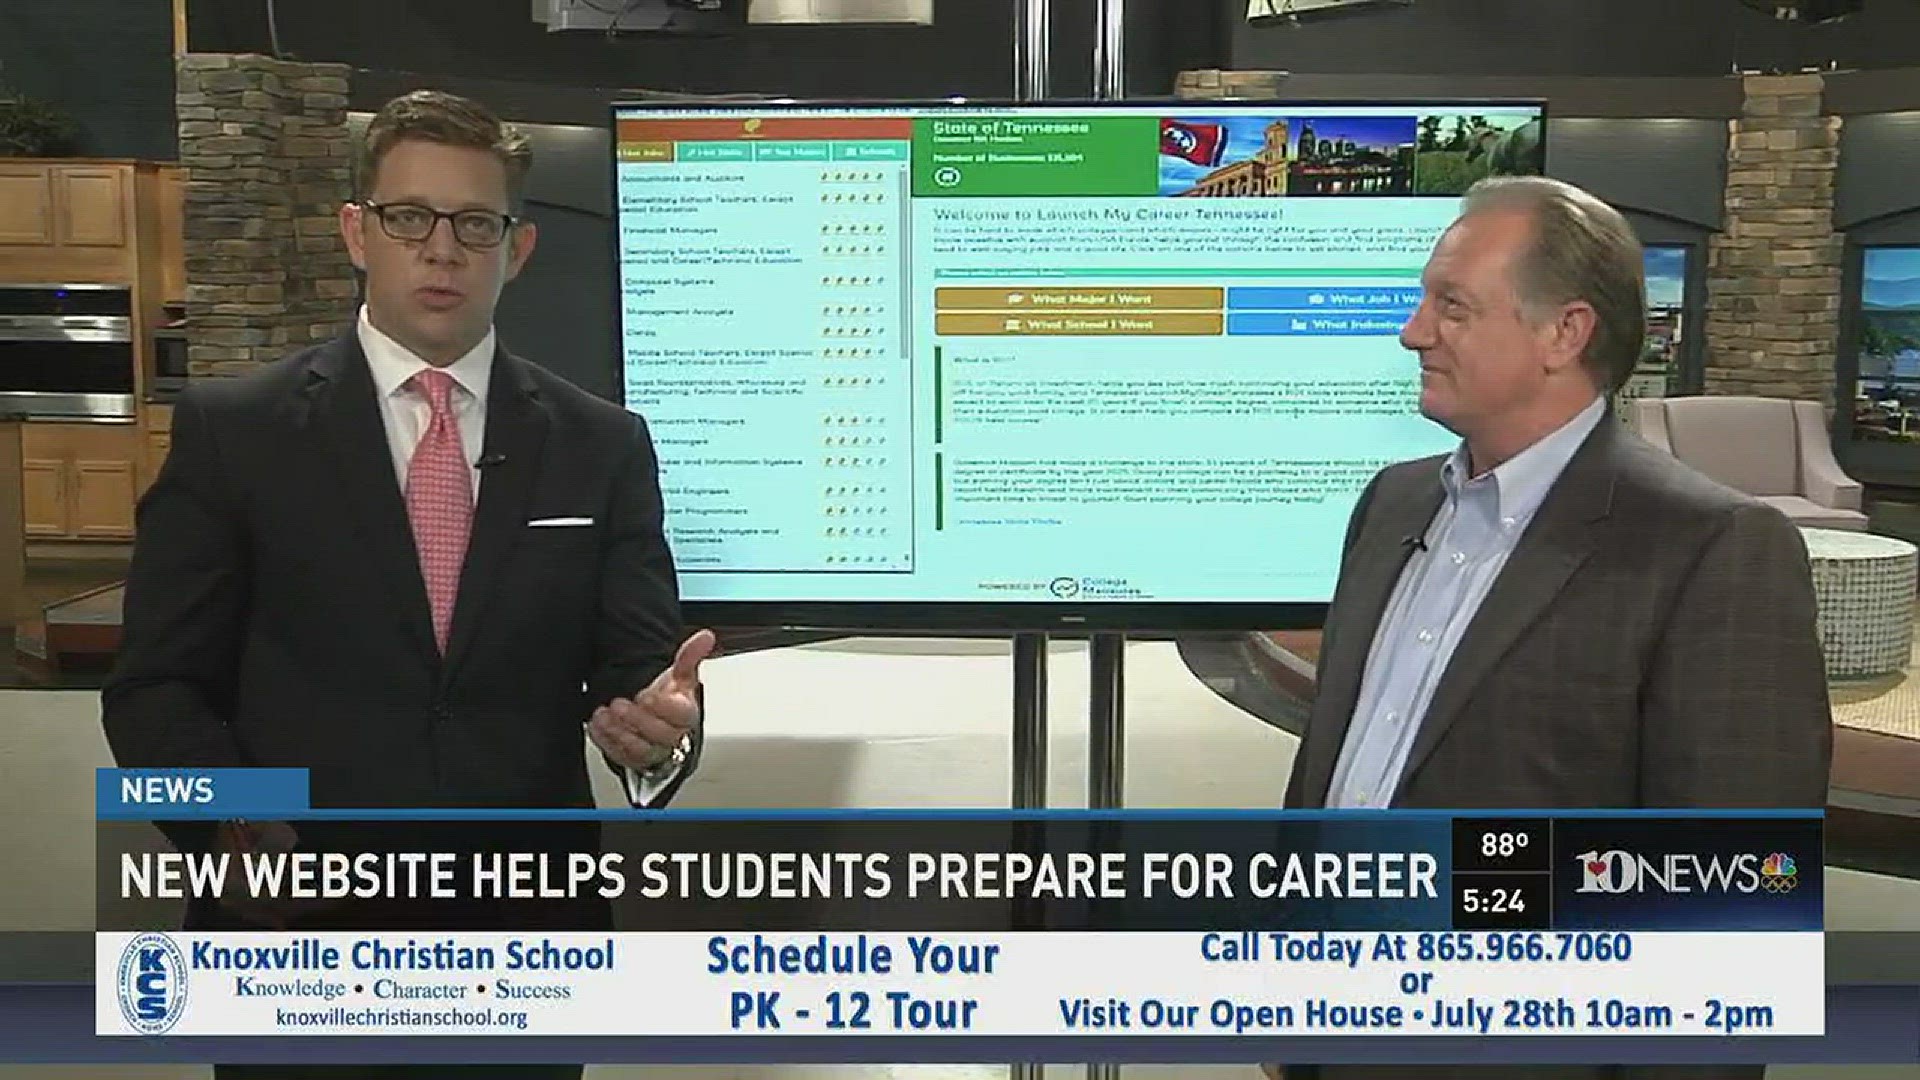 Knoxville Chamber Senior Vice President Mark Field joins WBIR to talk about Launch my Career TN, an online program that aims to help high schoolers take the guesswork out of choosing a career.